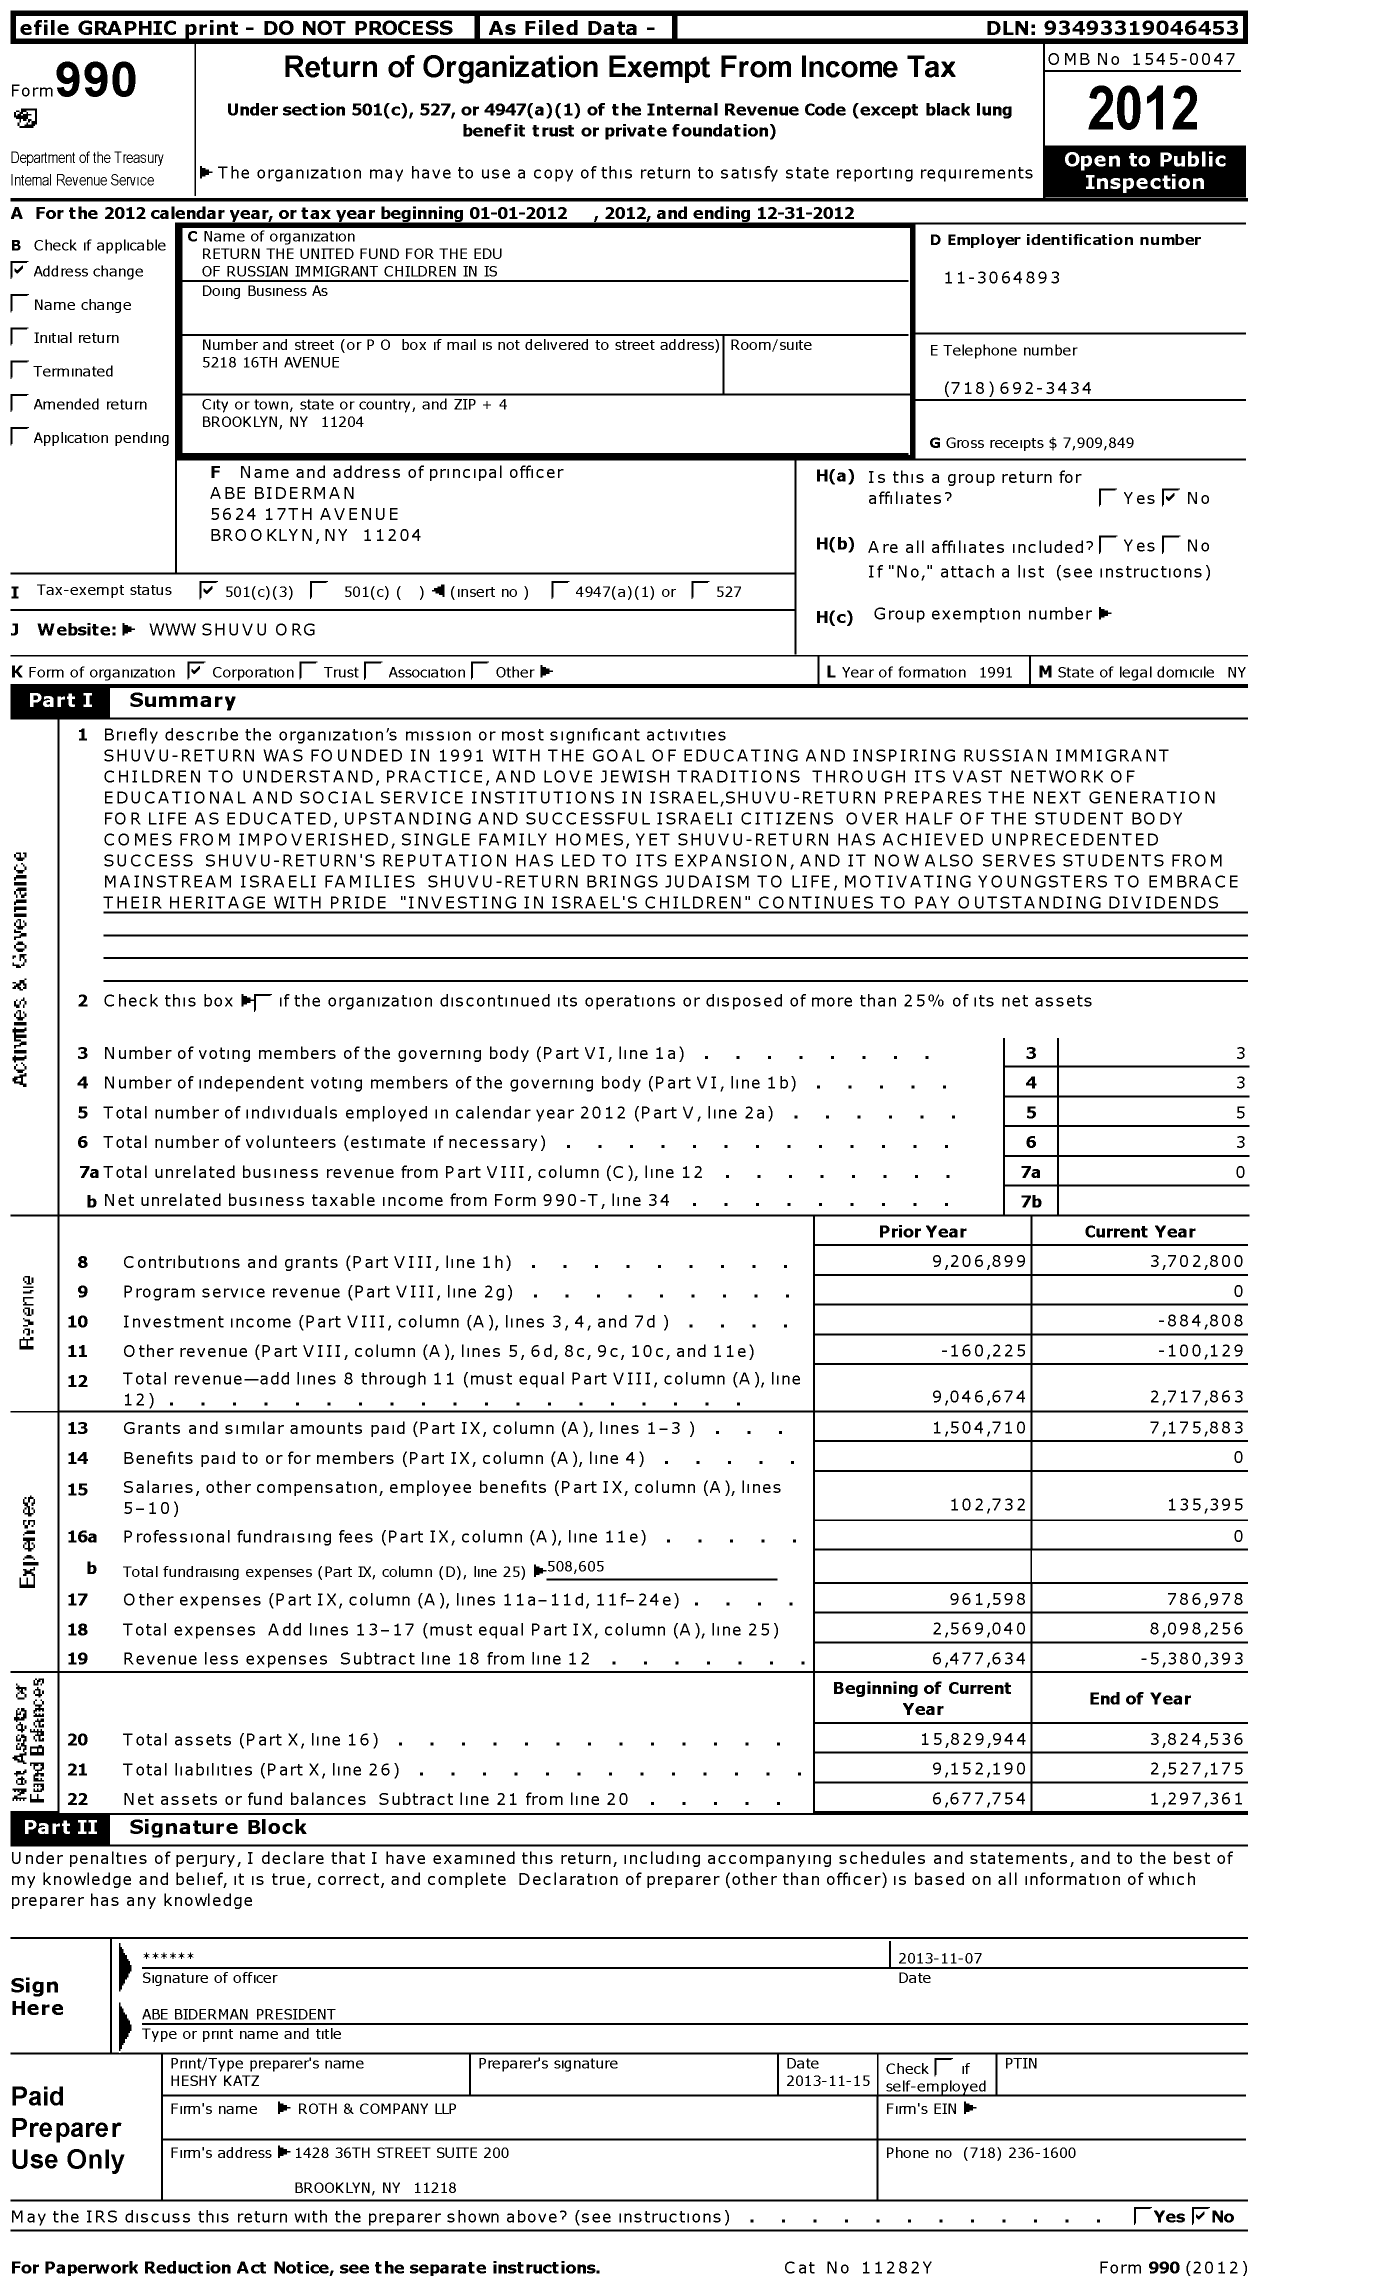 Image of first page of 2012 Form 990 for Return the United Fund for the Edu of Russian Immigrant Children in Is